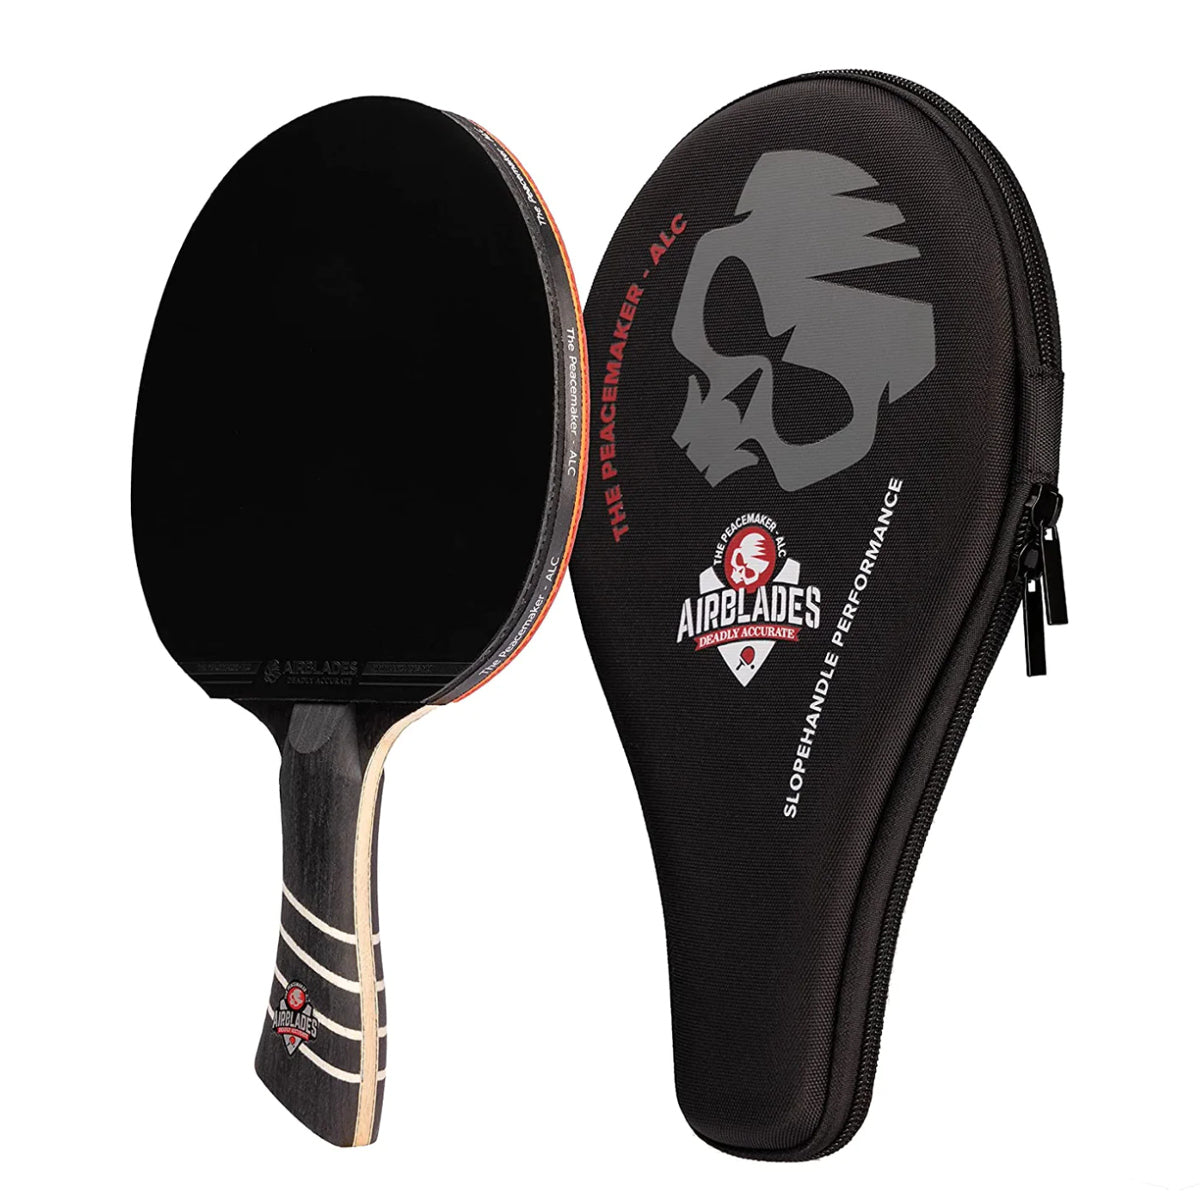 Airblades The Peacemaker - ALC Professional Ping Pong Paddle